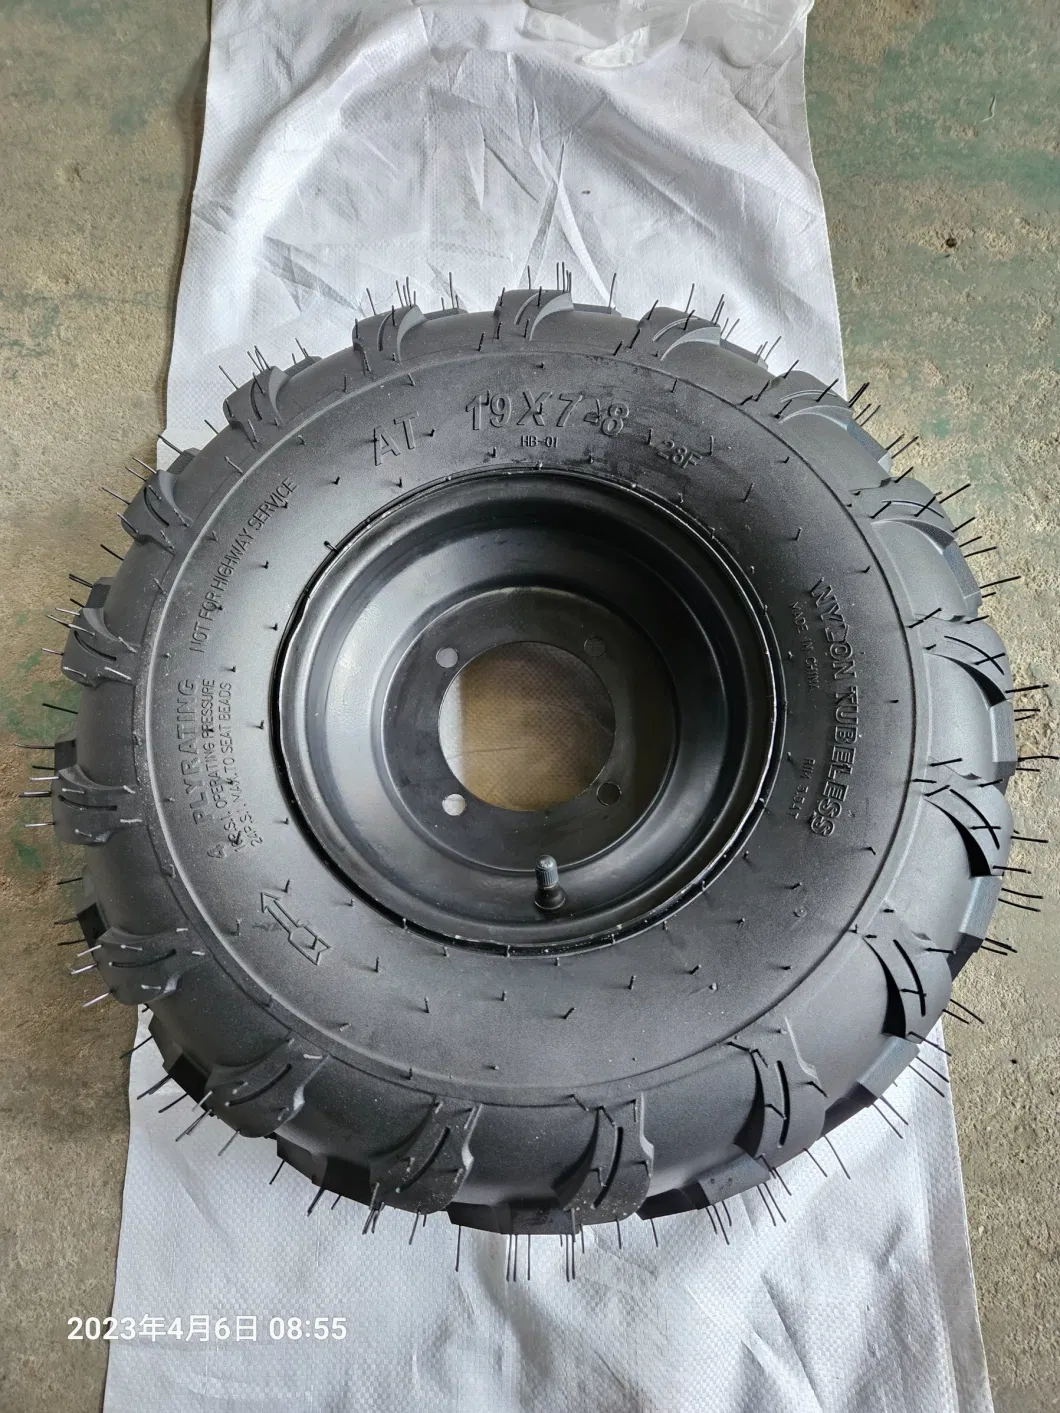 off Road Tire ATV Tubeless Tire/All Terrain Vehicle Tubeless Tire 6.50-8 Rubber Wheel Farm Machinery Wheels Tractor Tire